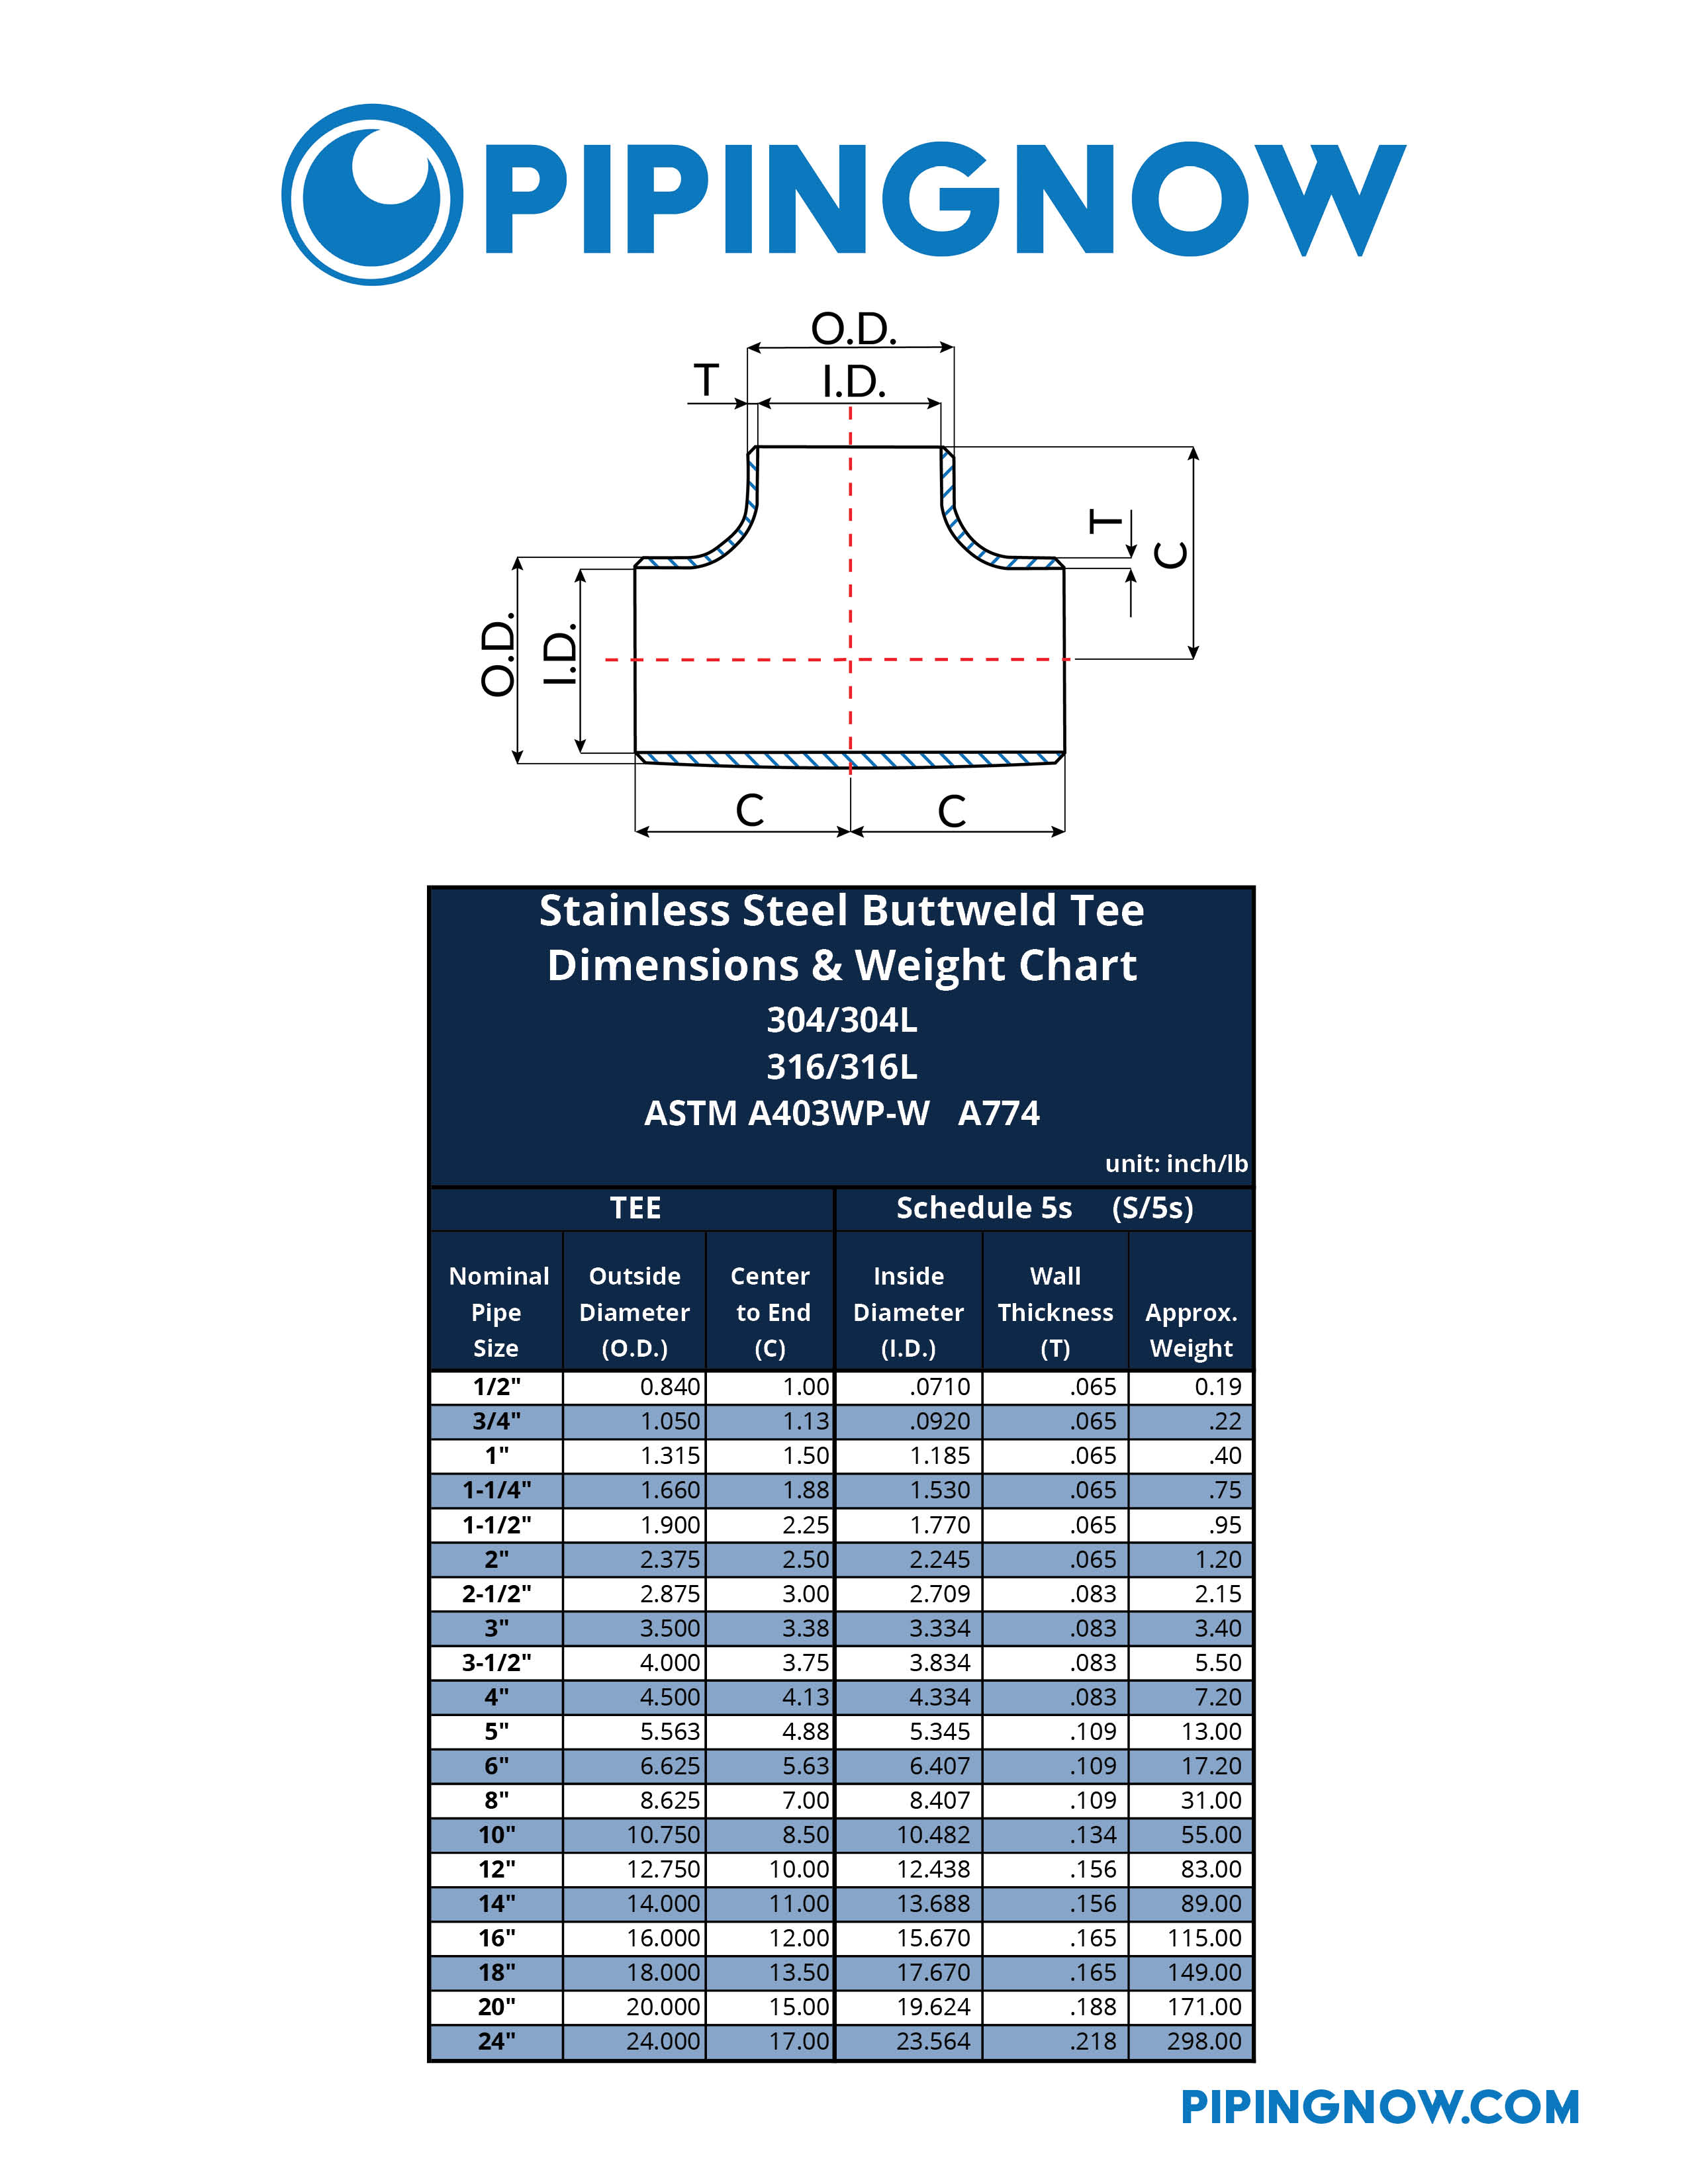 Product Weights, MSDS, Size, and Dimensions | PipingNow